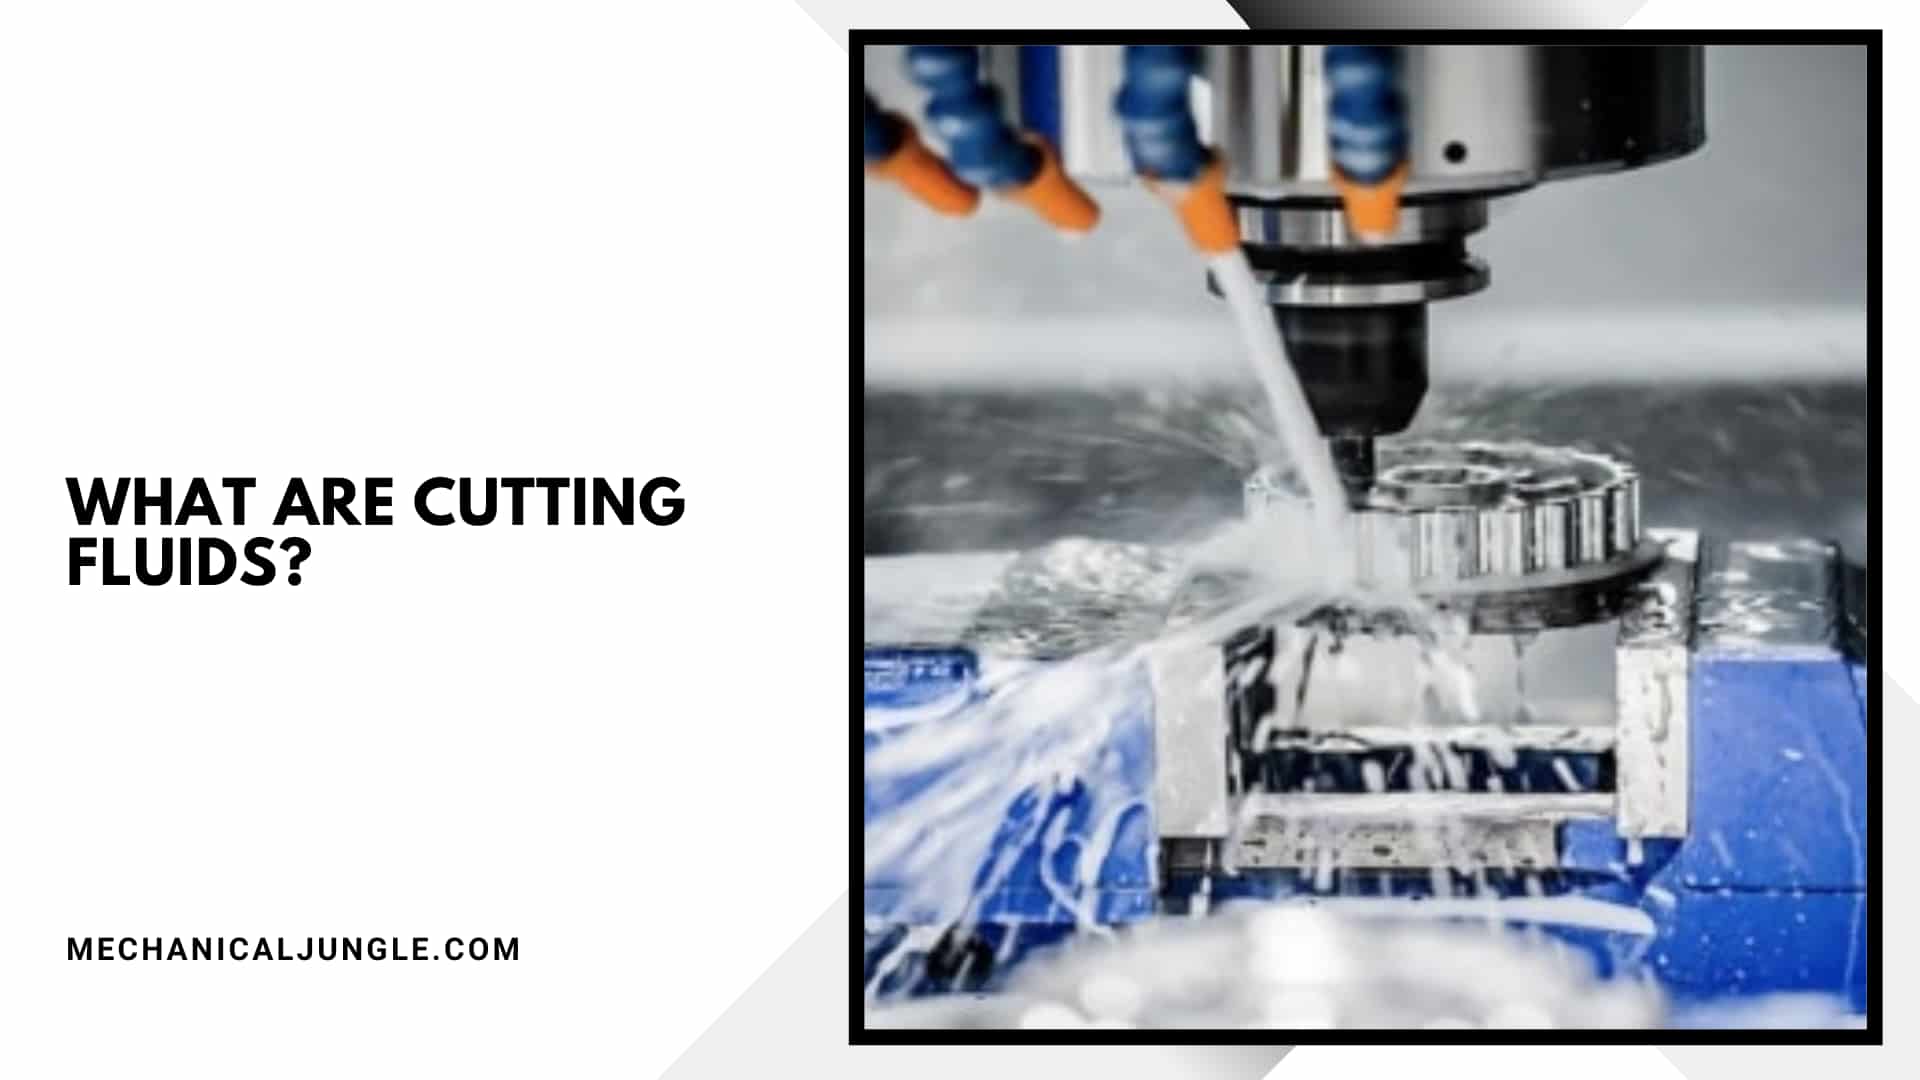 What Are Cutting Fluids?